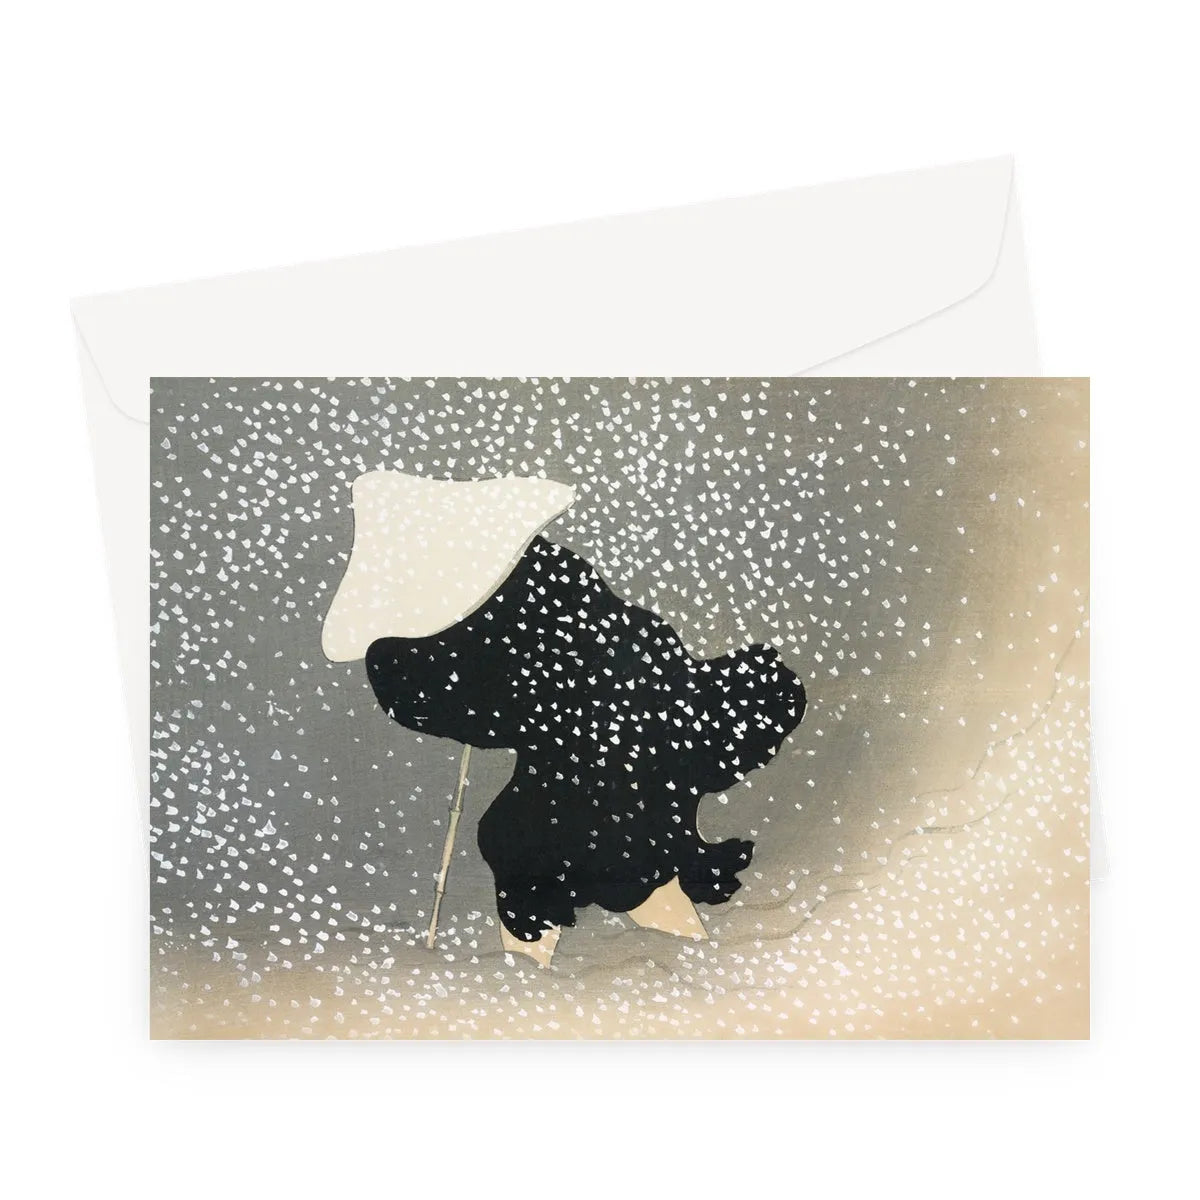 Snow By Kamisaka Sekka Greeting Card - A5 Landscape / 1 Card - Greeting & Note Cards - Aesthetic Art